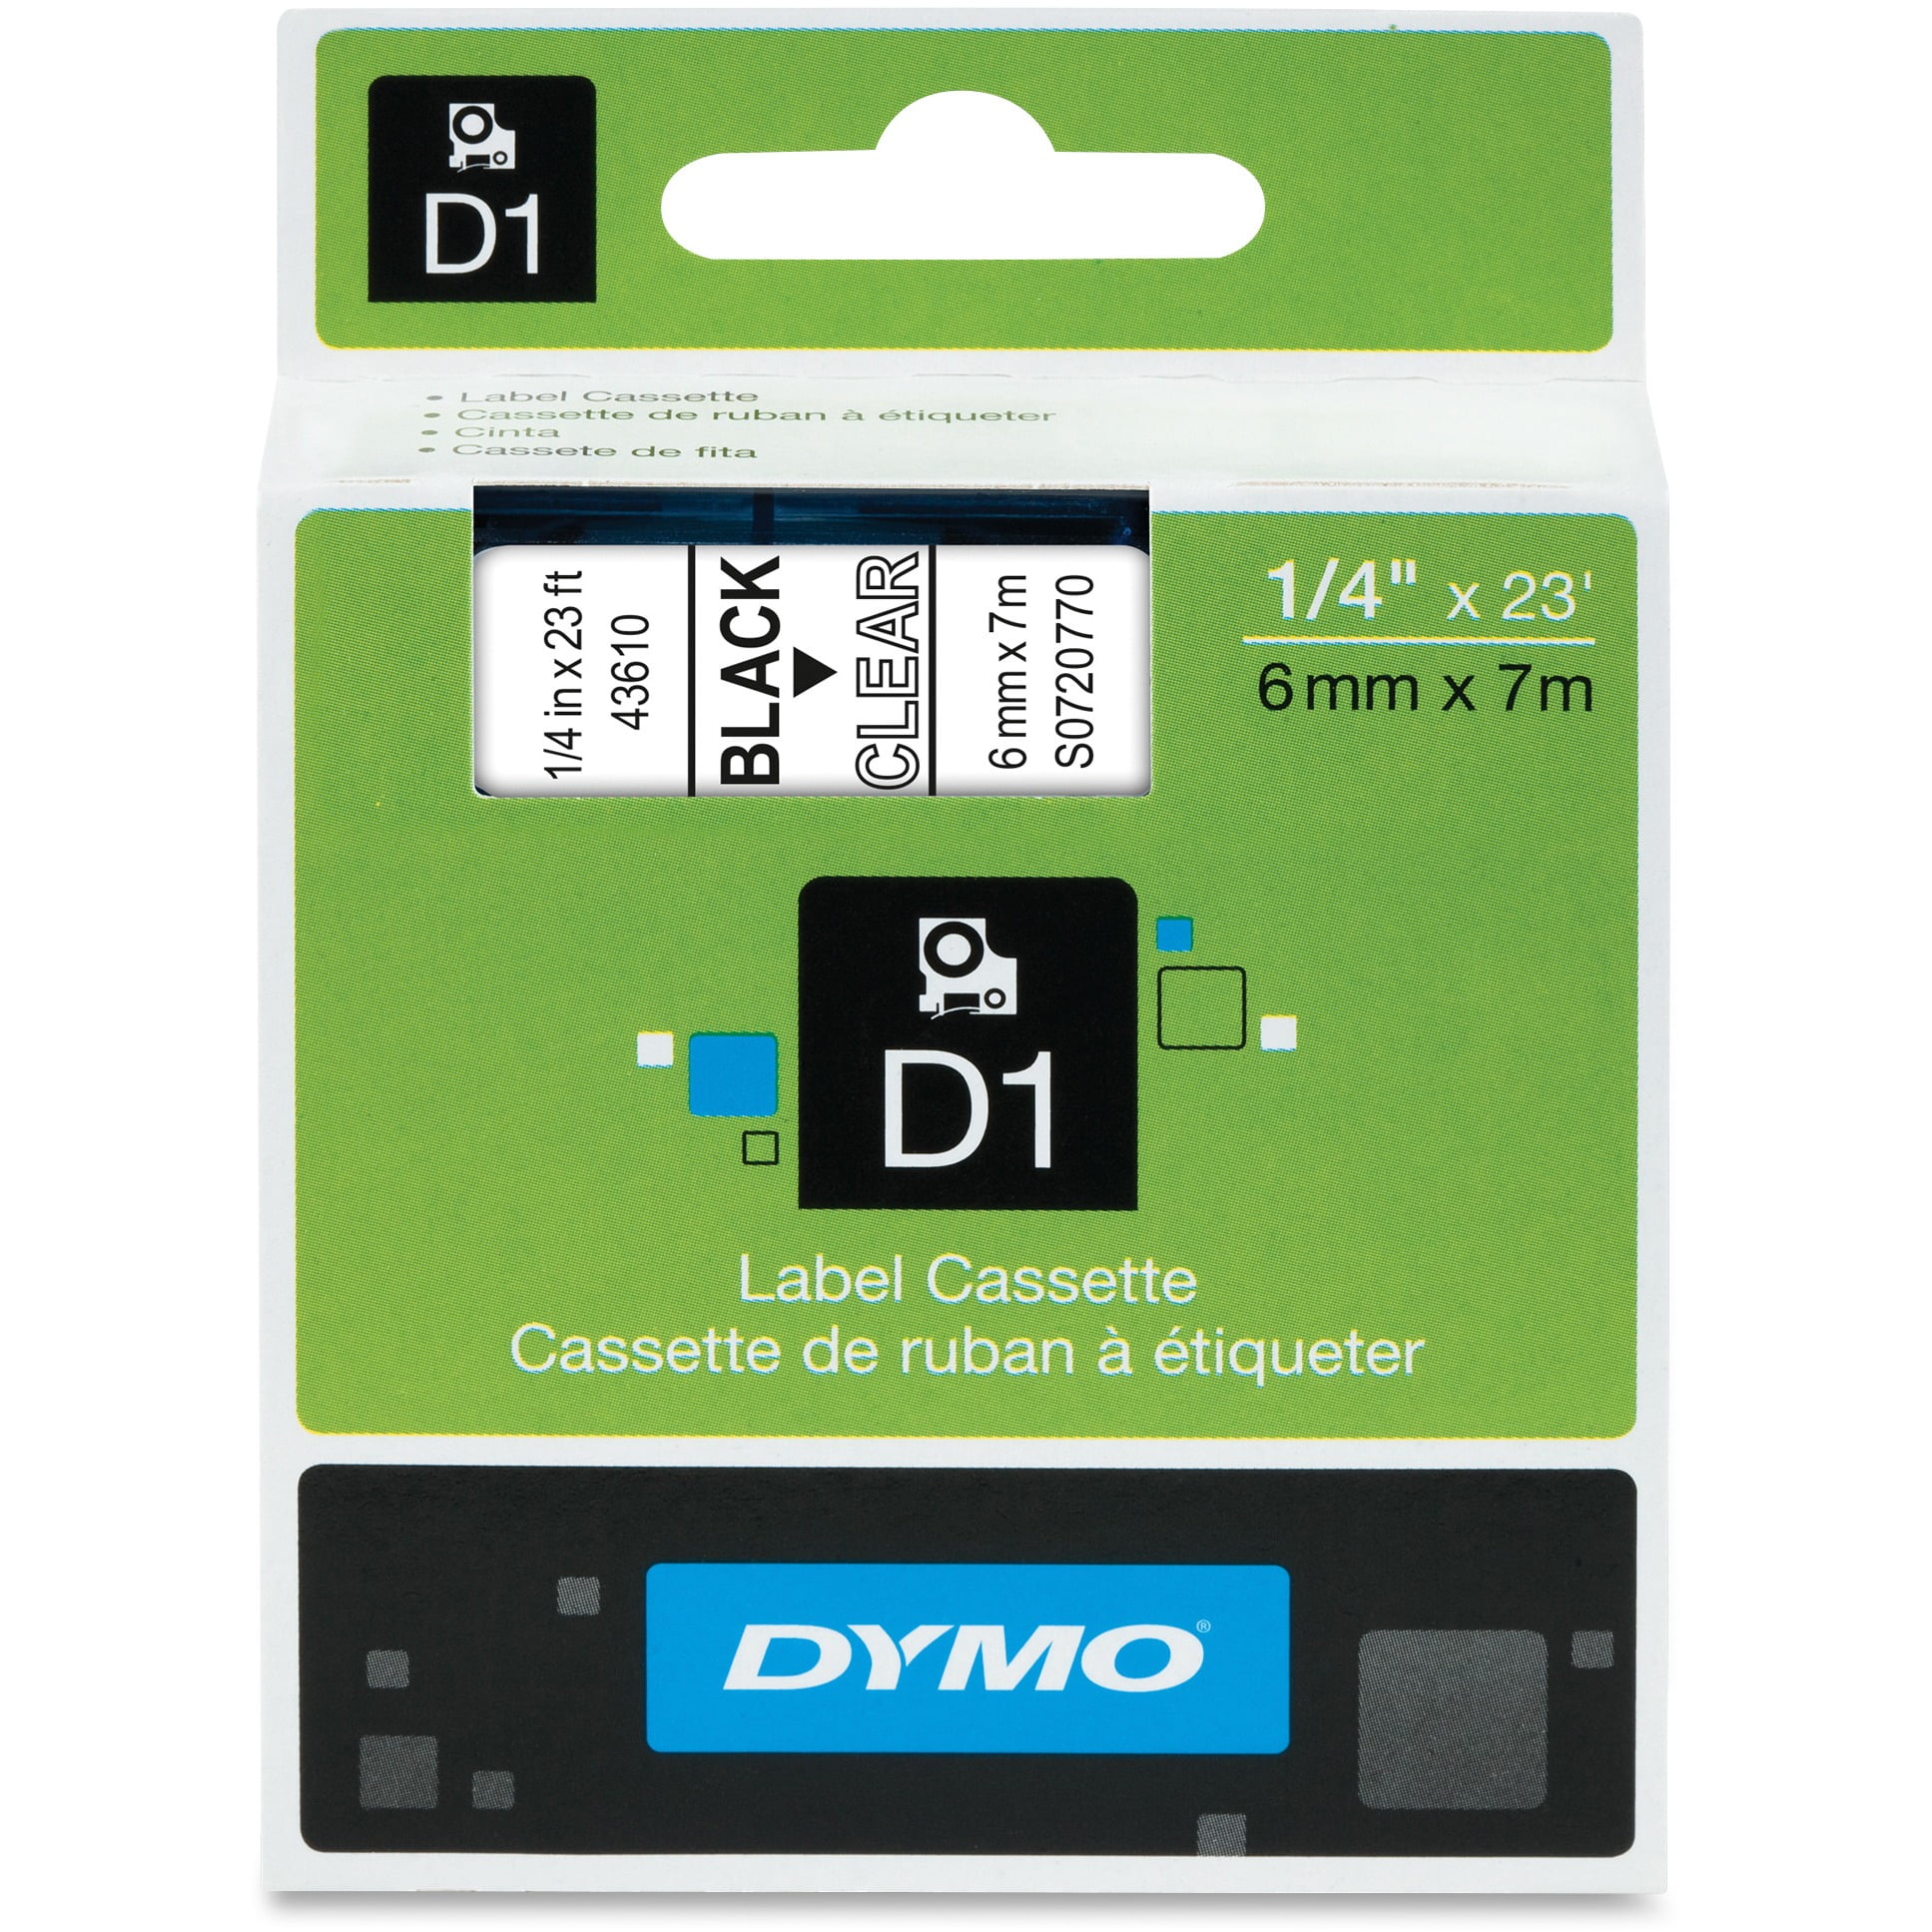 Dymo Lot Of 4 Dymo D1 Labeling Tape 2-Pack 8 Total Black on Neon Pink & Neon Green 